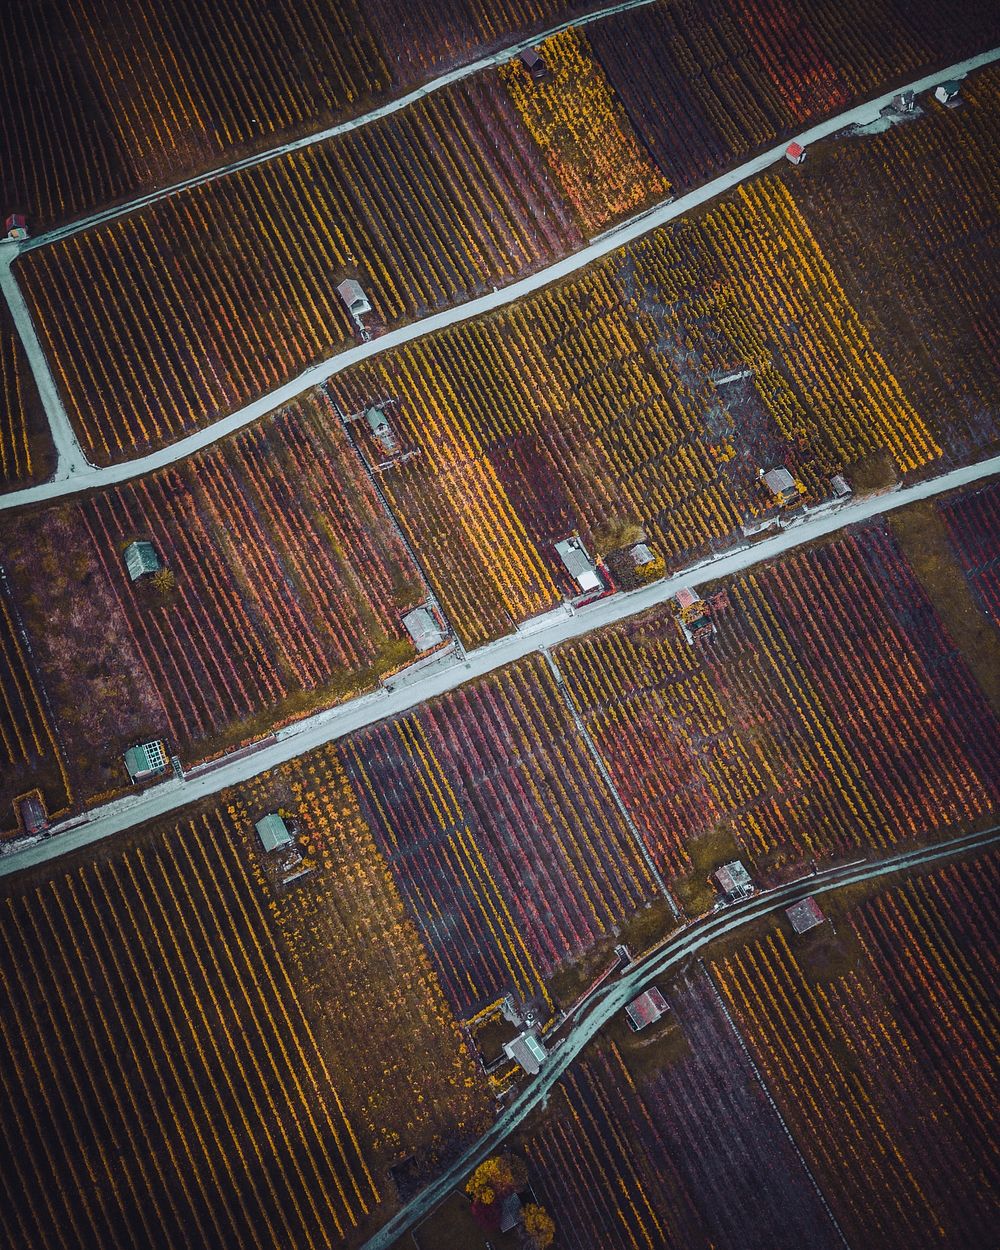 Aerial view of harvested fields in Maulbronn, Germany